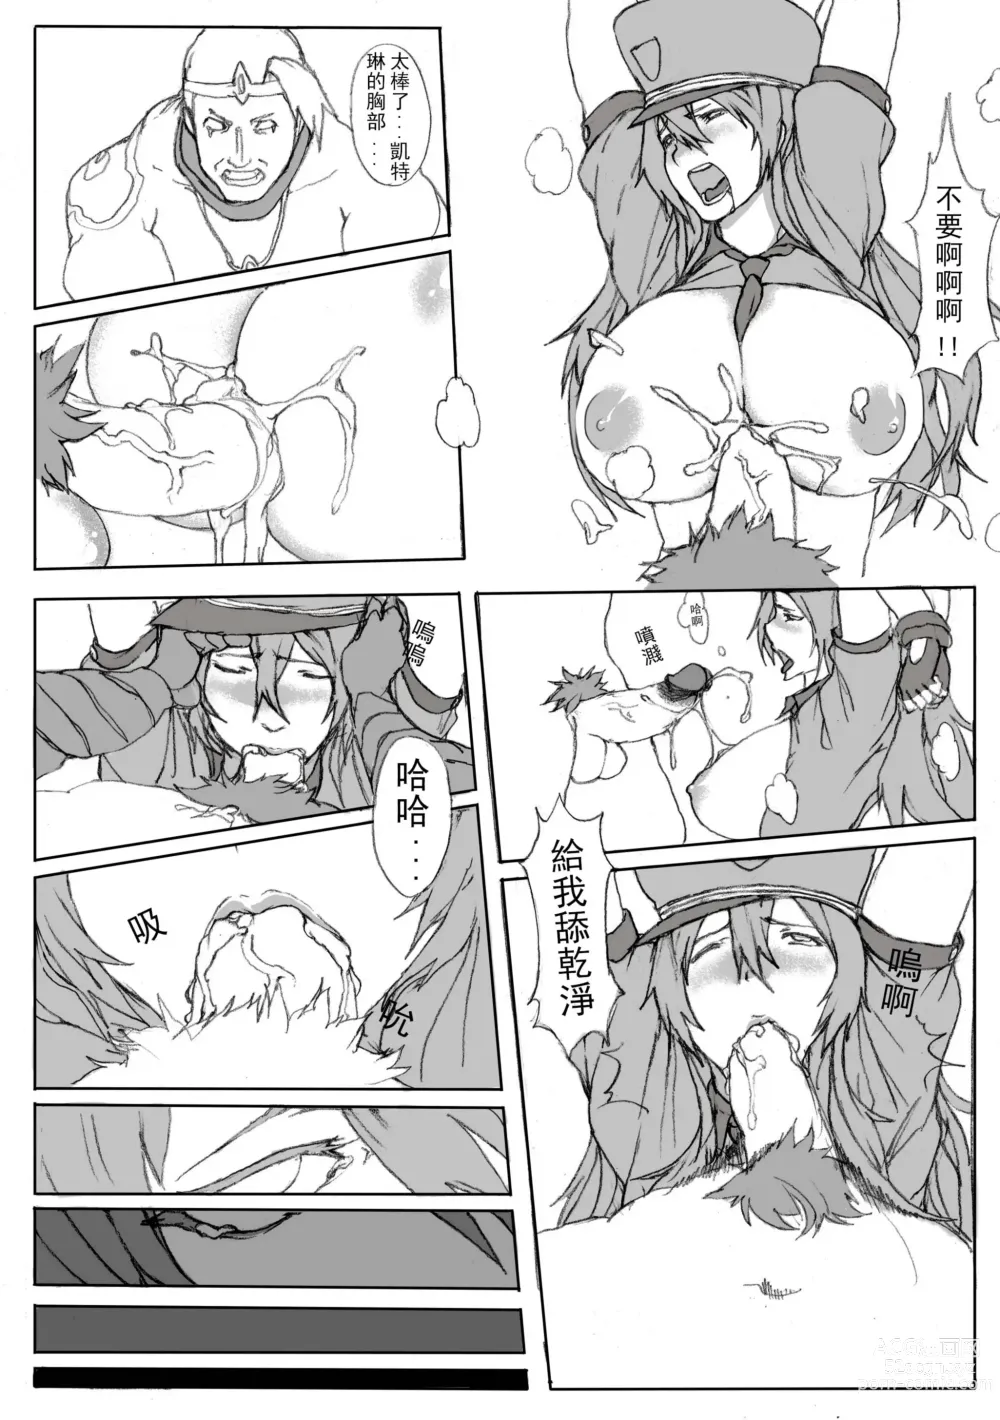 Page 10 of doujinshi 凱特琳壞壞 (League of Legends) [無修正]中文